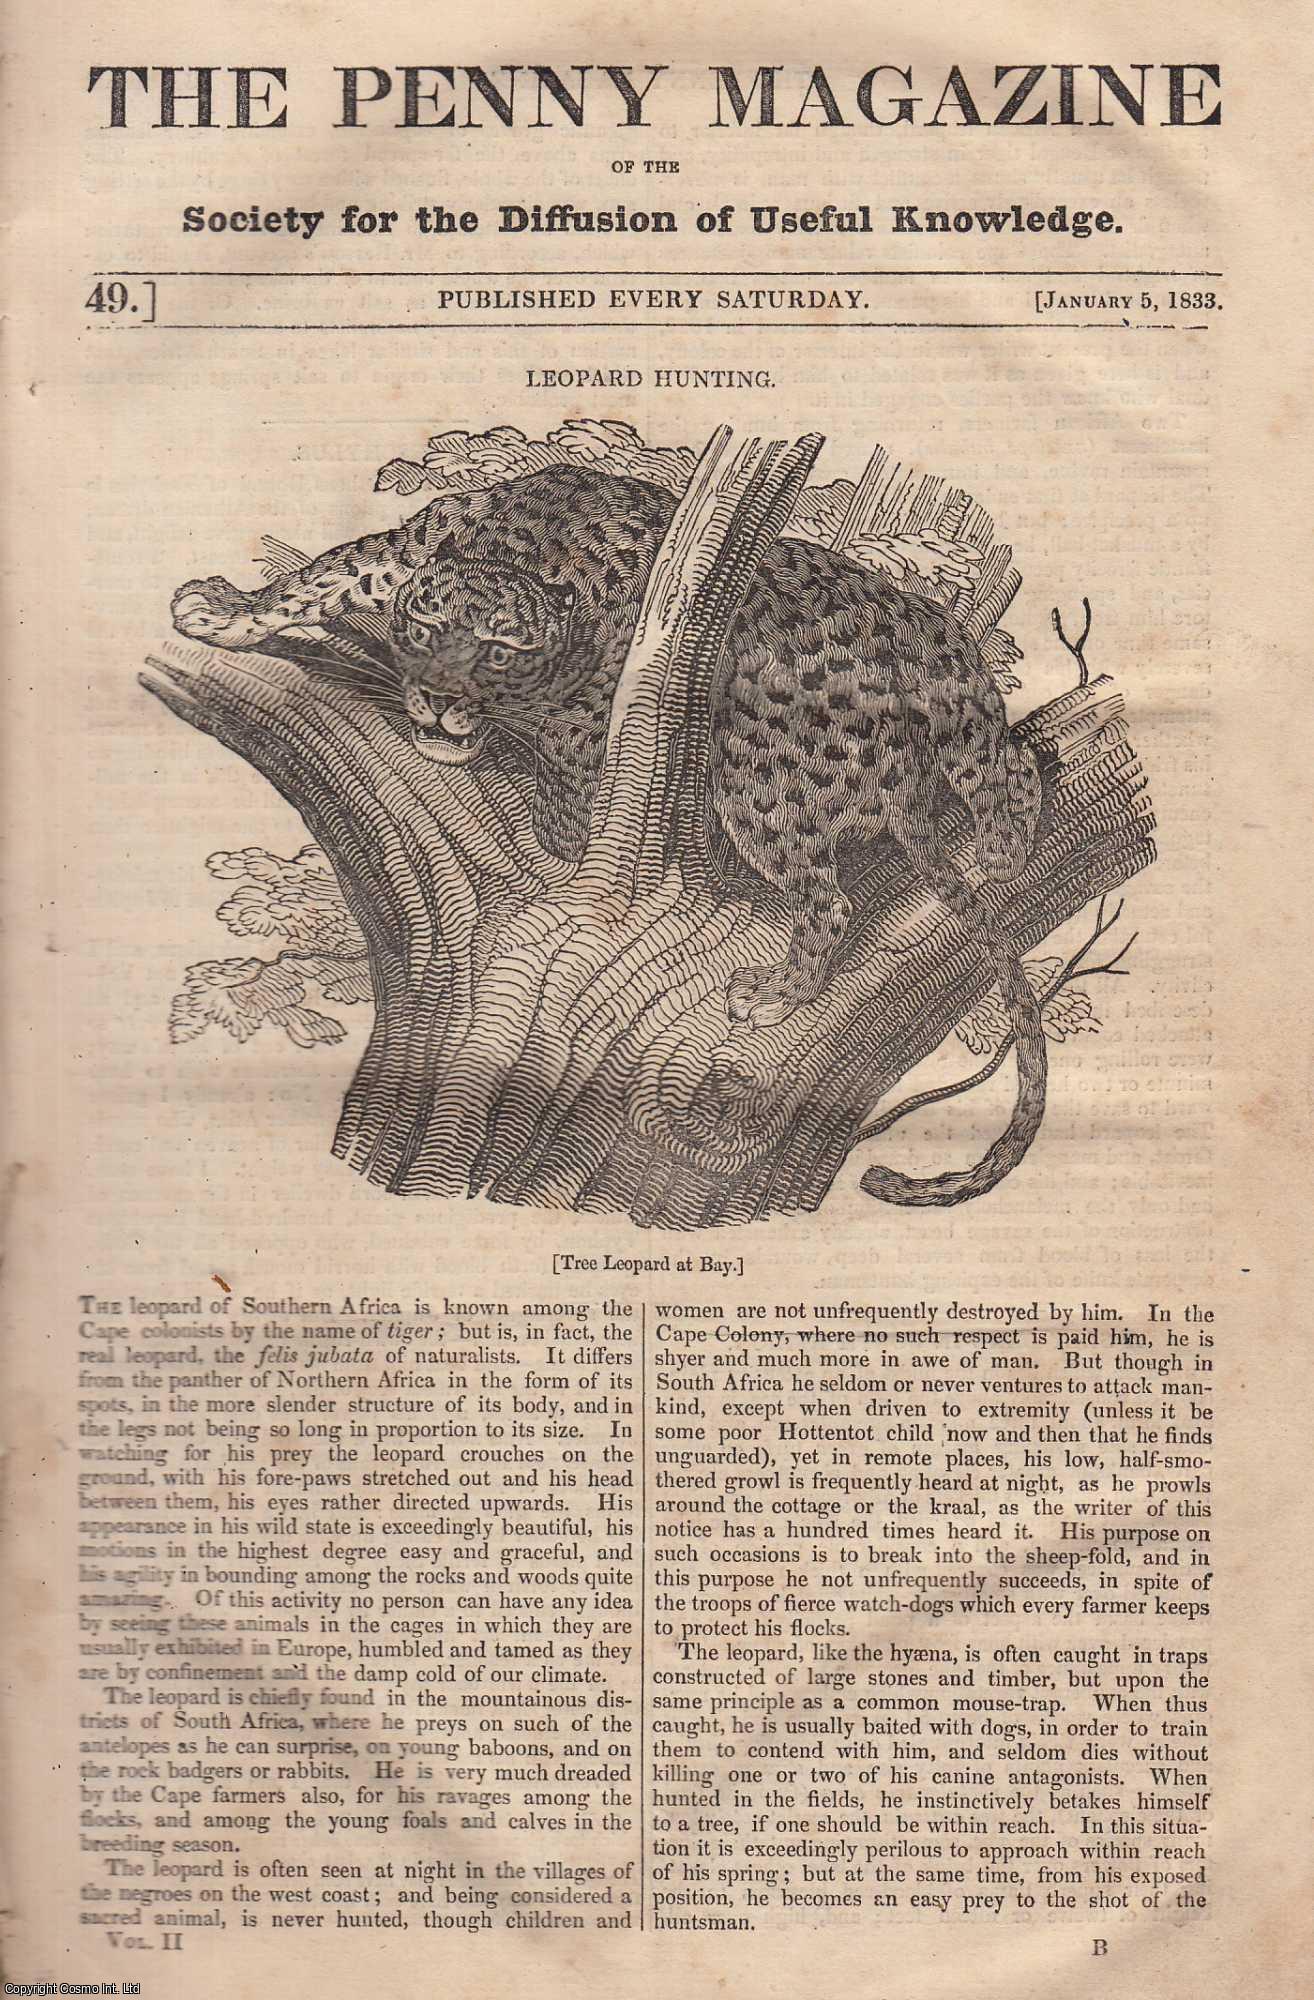 Penny Magazine - Leopard Hunting; A Salt Lake in South Africa, etc. Issue No. 49, January 5th, 1833. A complete original weekly issue of the Penny Magazine, 1833.